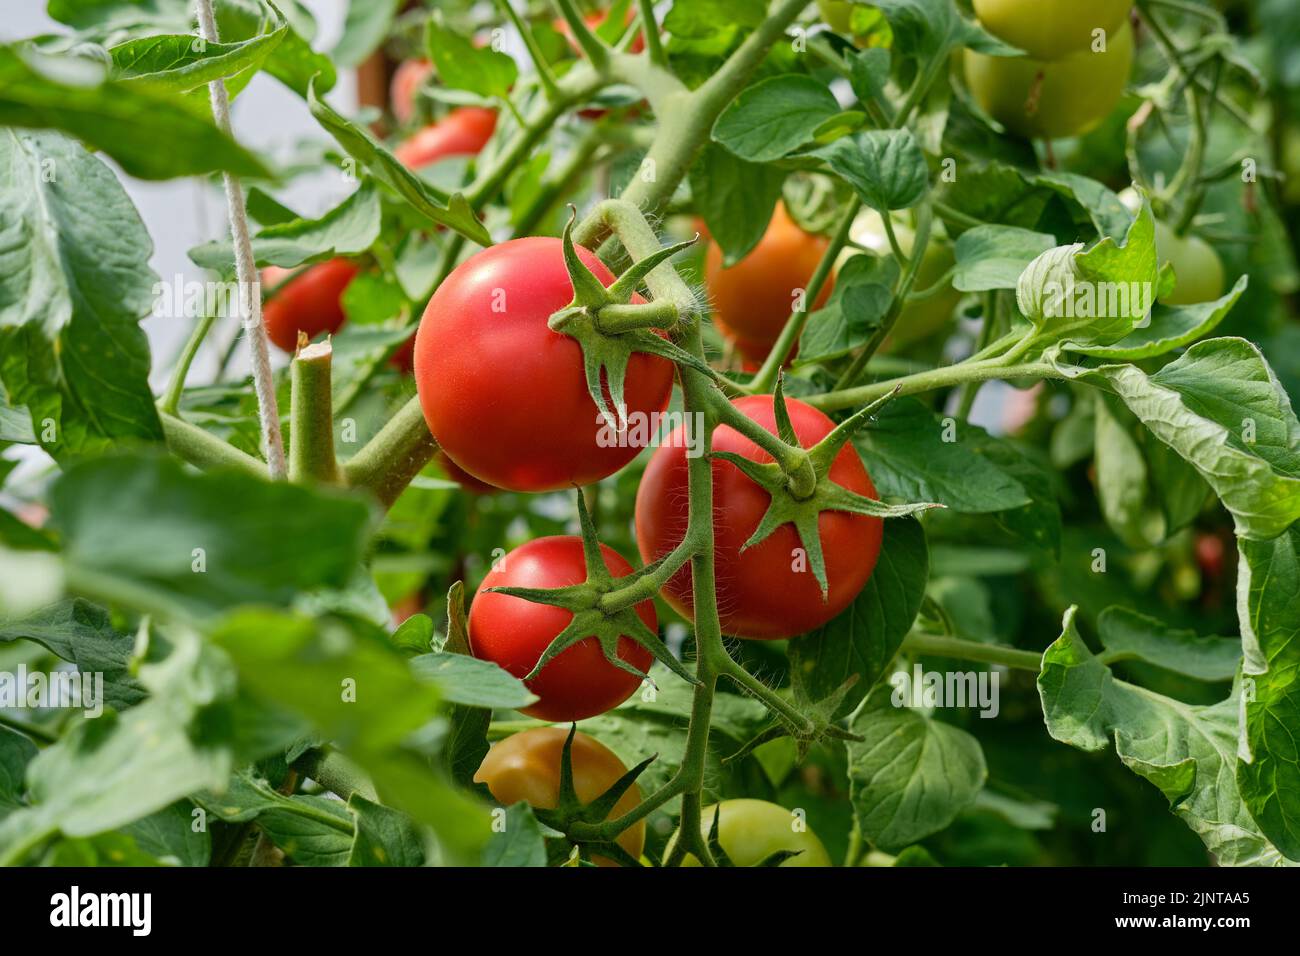 Ripe red round tomatoes on a branch. Stock Photo